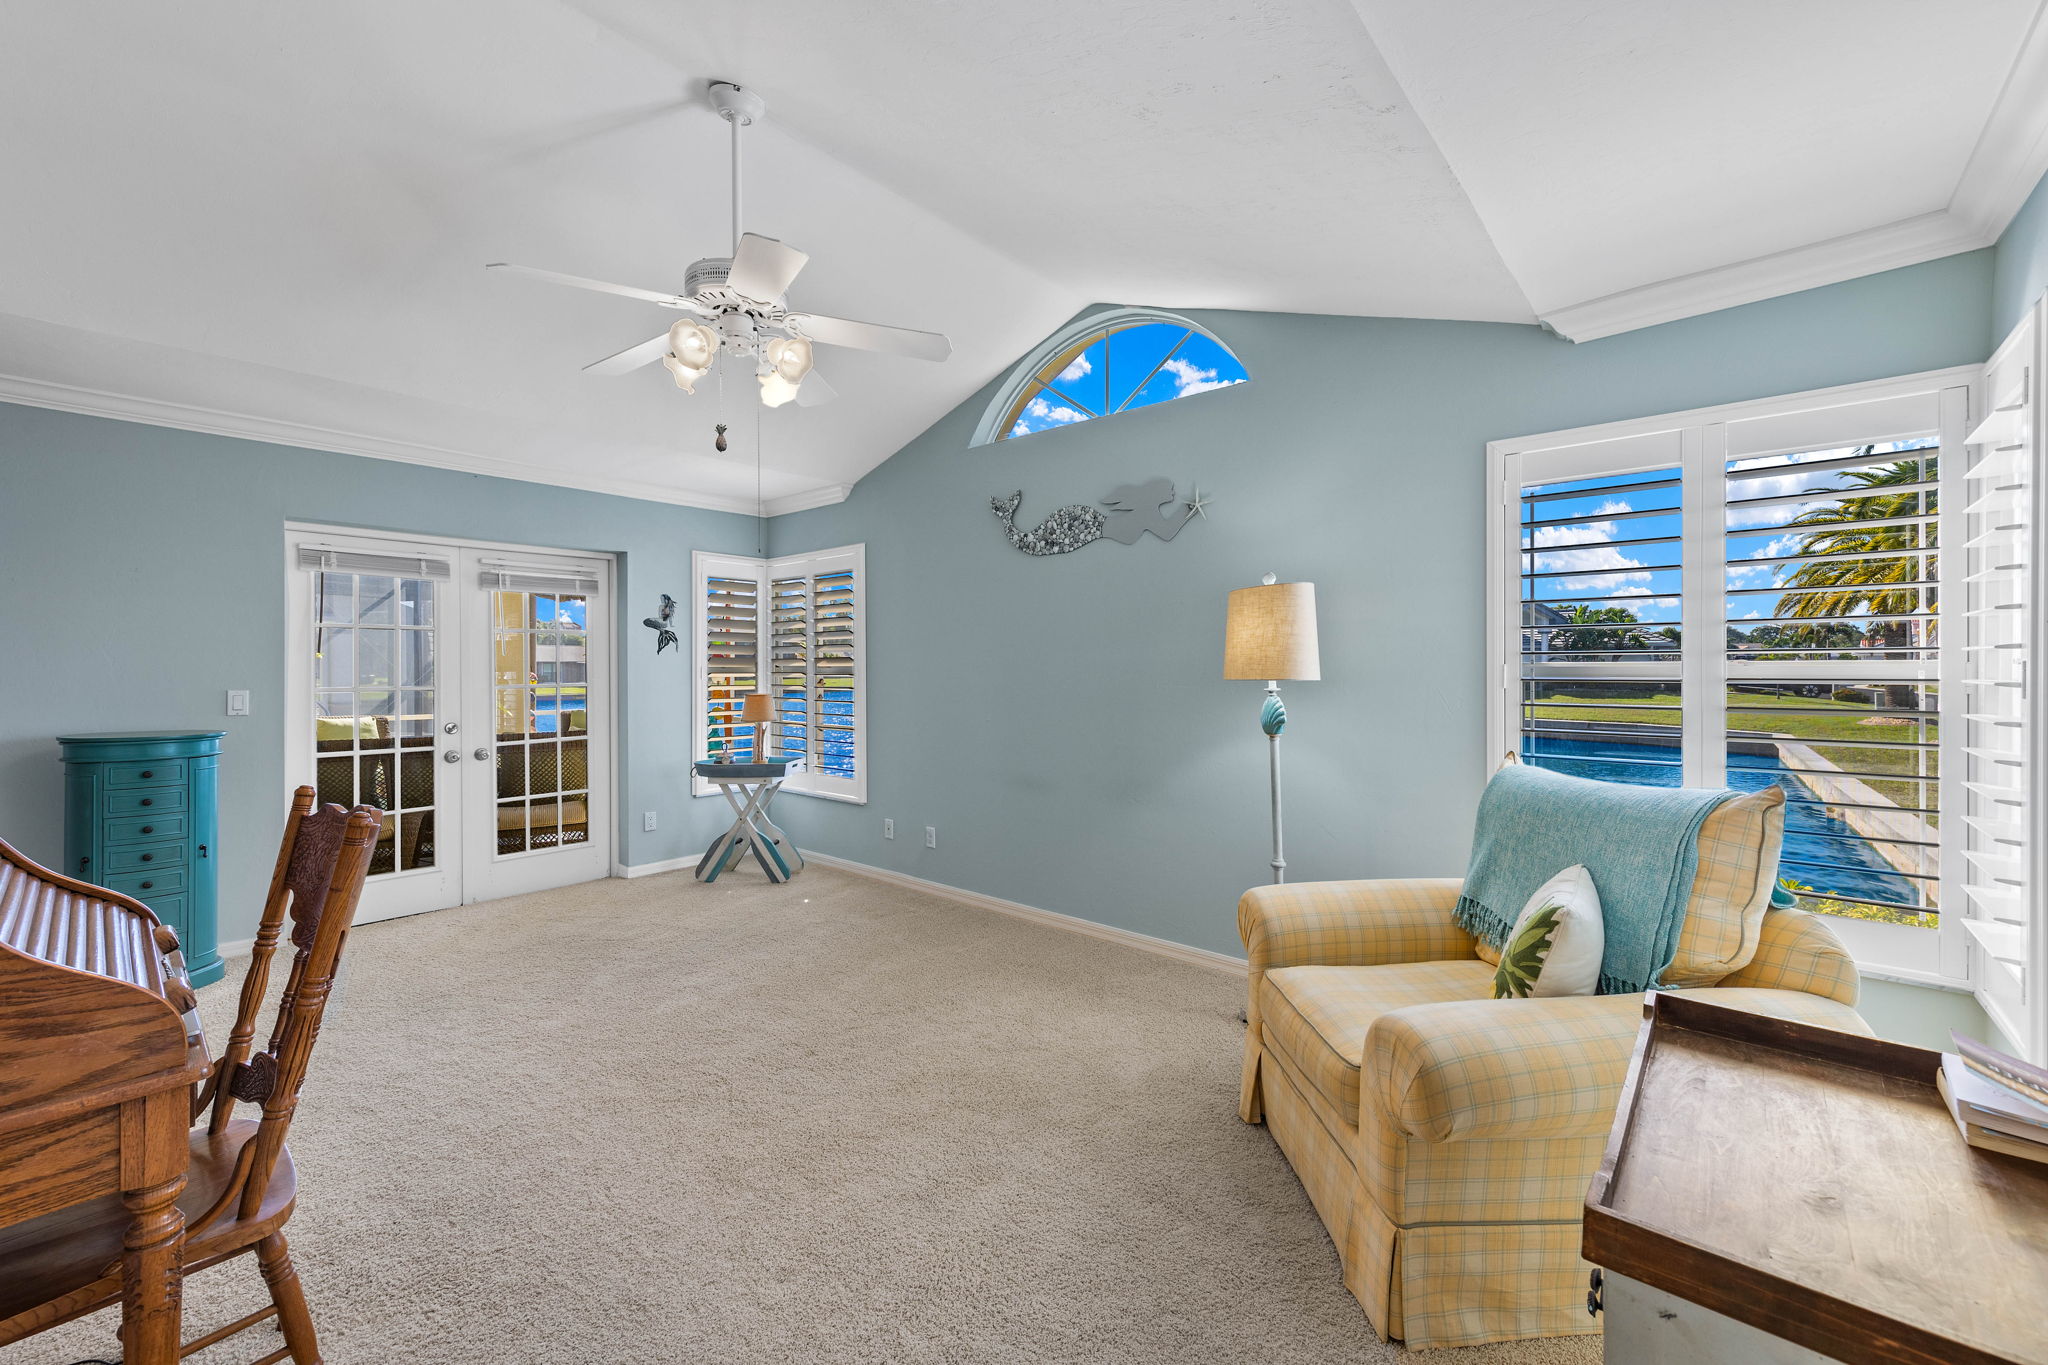 virtually staged- please remove furniture in the room-Same beach theme as house